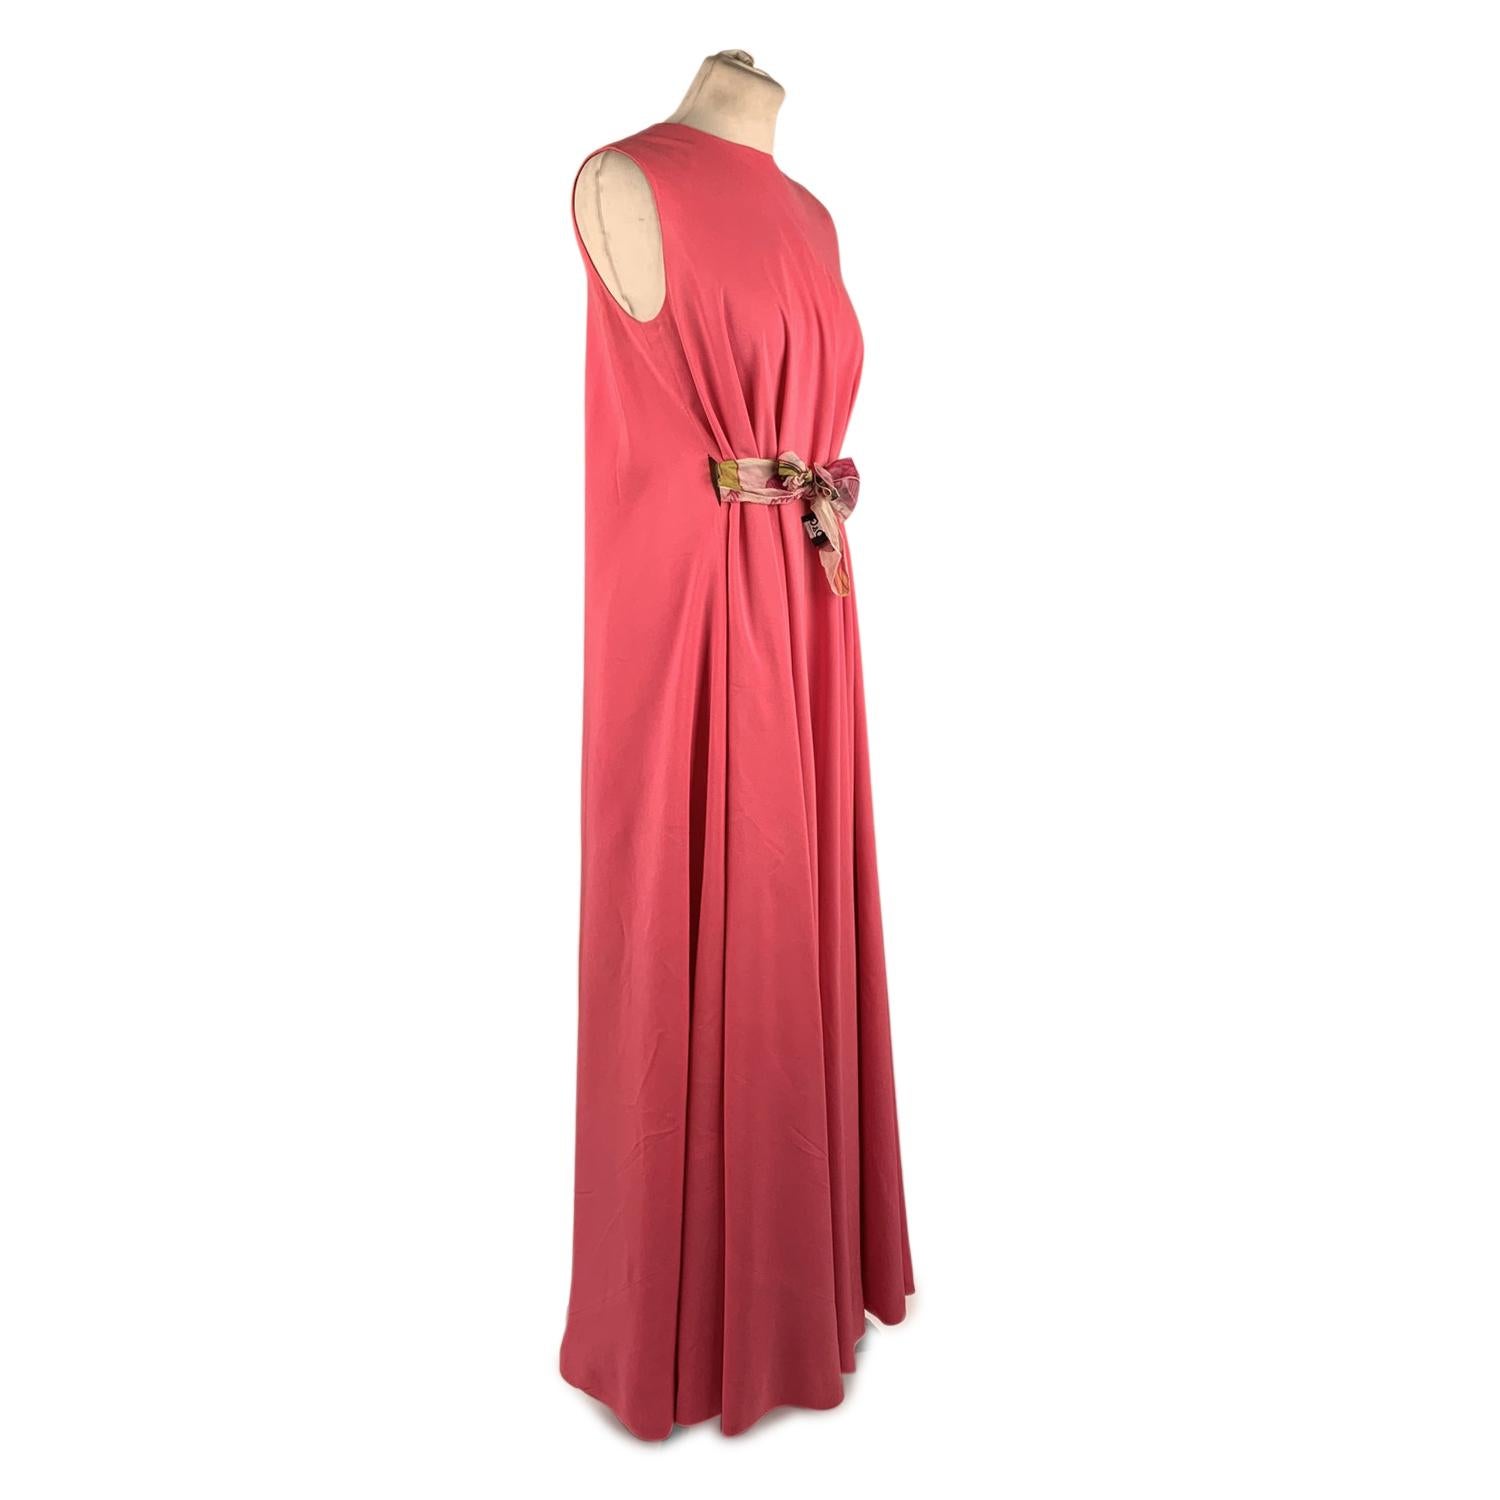 La Mendola Vintage Pink Kaftan Sleeveless Gown Evening Dress Size 46

Beautiful vintage 1970 maxi long dress in pink color signed La Mendola, Italy.  Silk Crepe de Chine. Sleveless styling and crewneck. Button closure on the shoulder. Front scarf